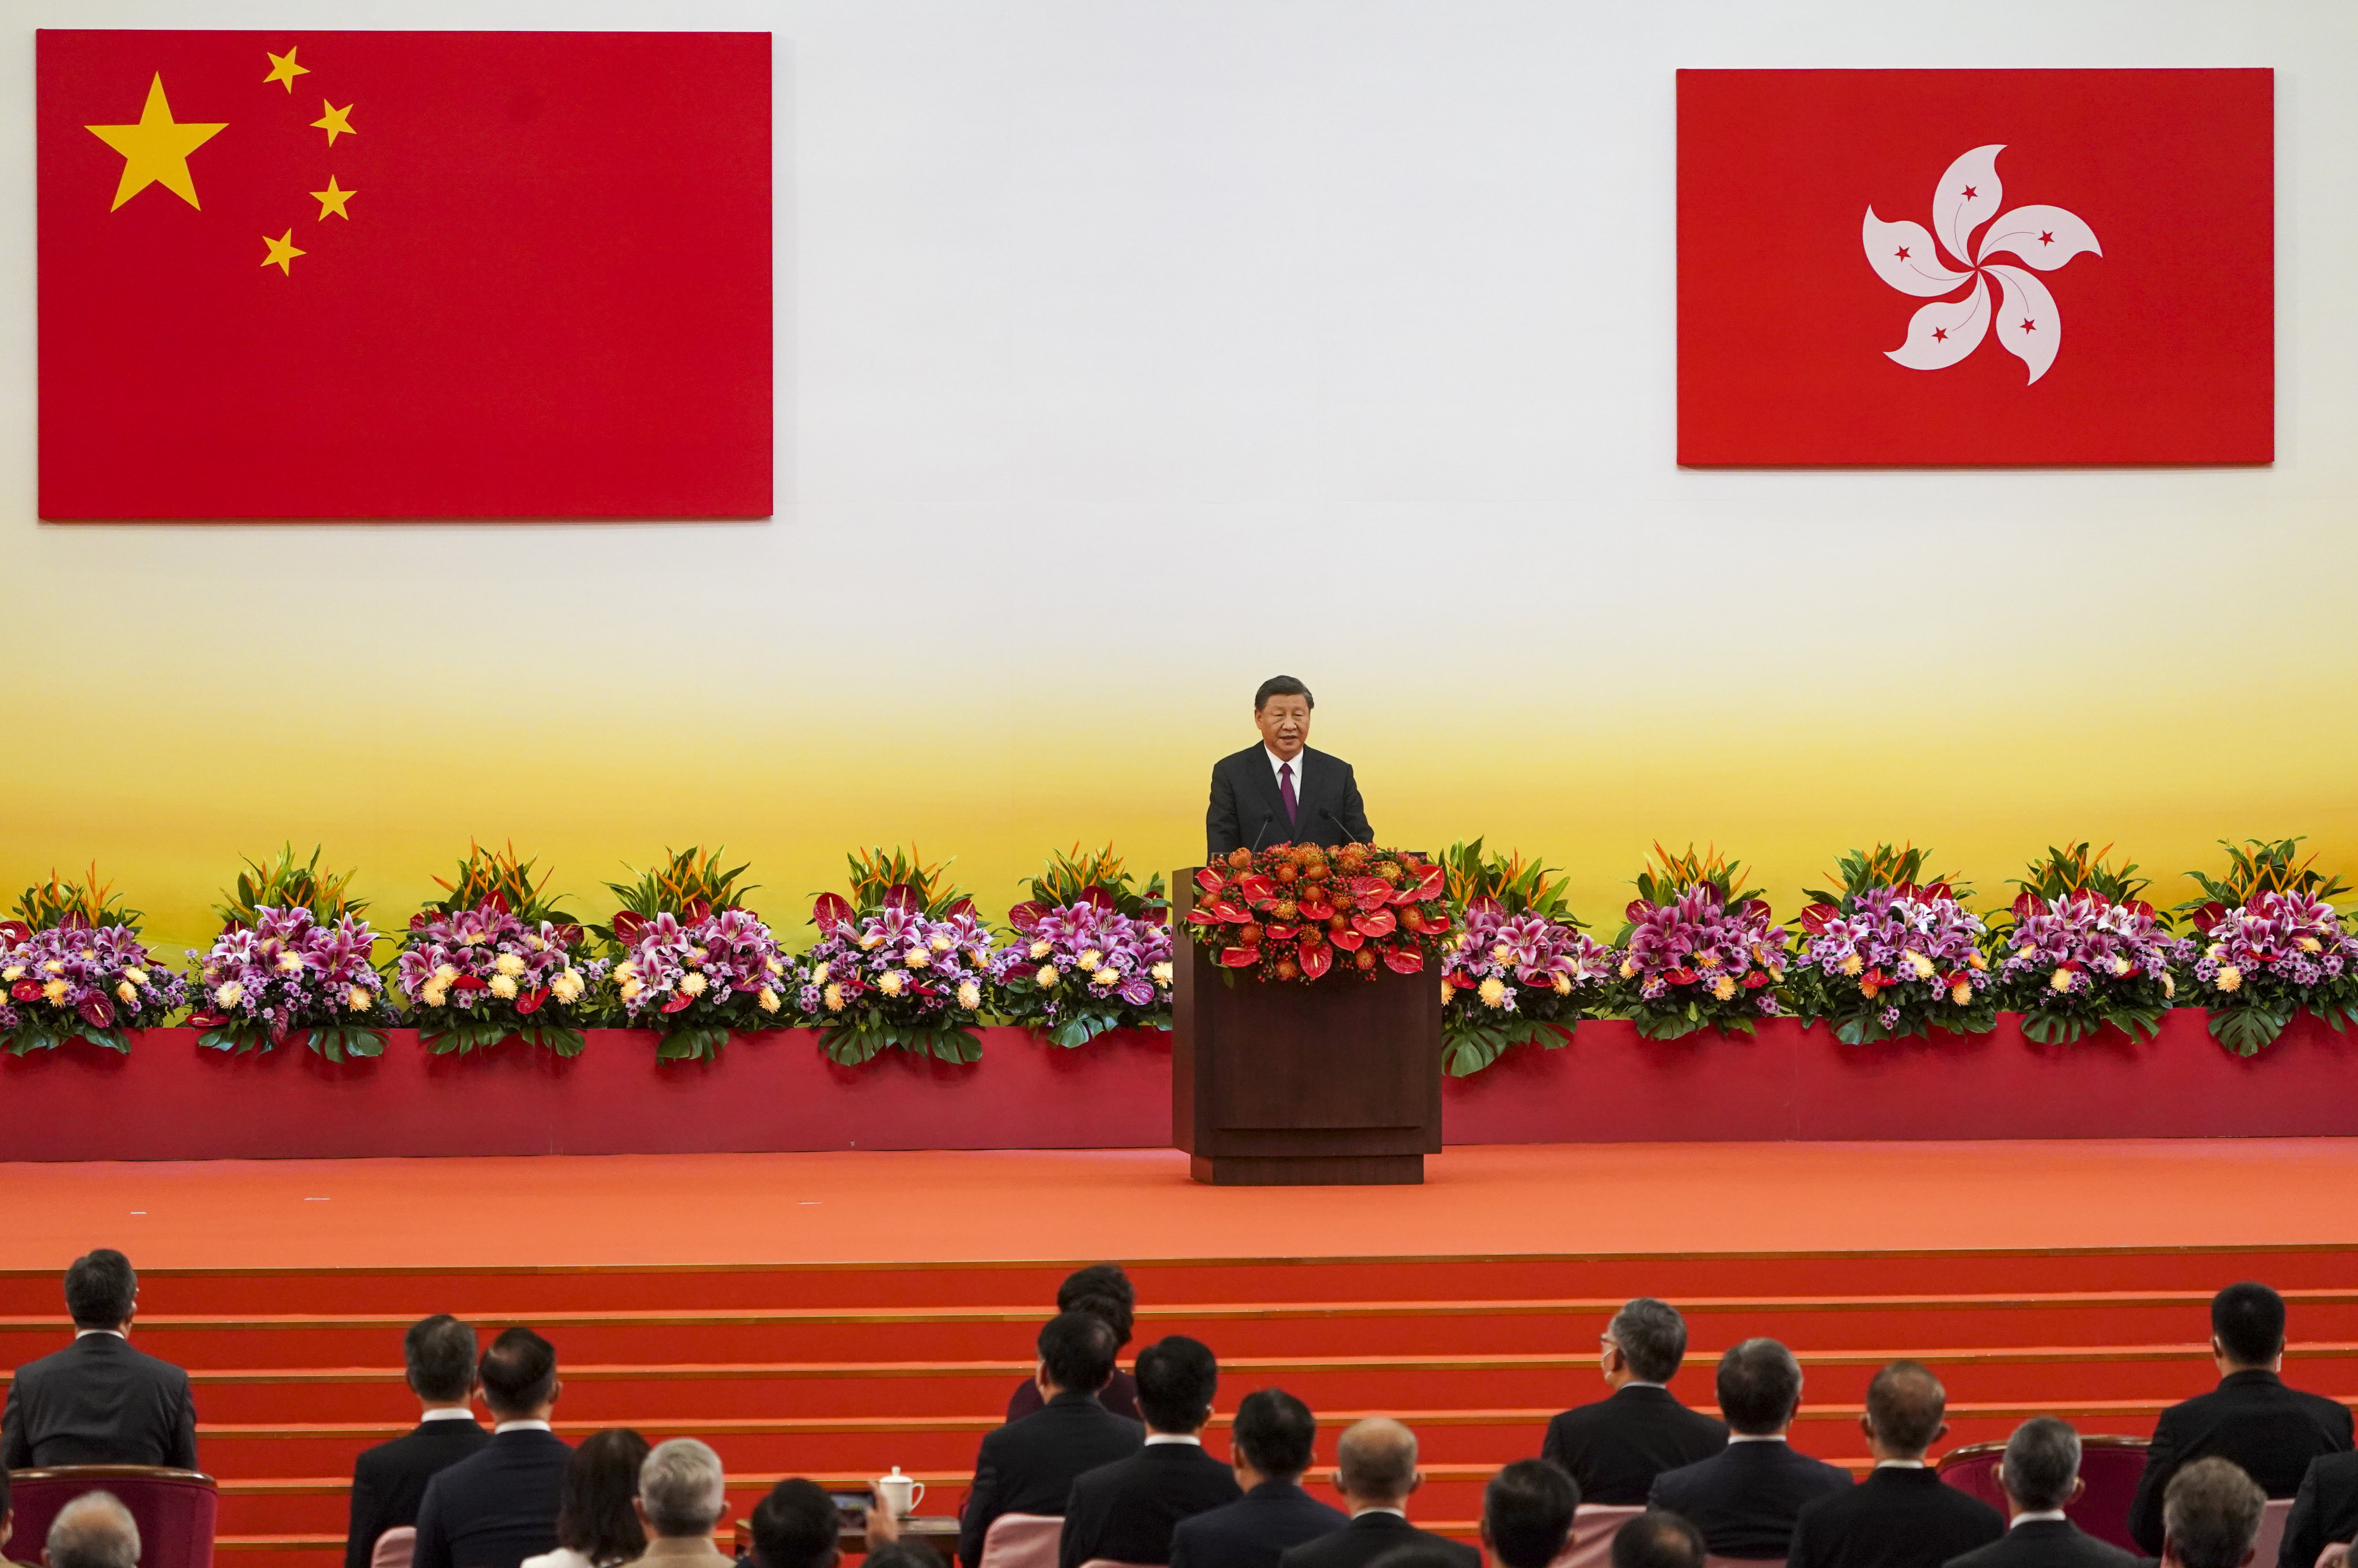 President Xi Jinping speaks at a gathering celebrating the 25th anniversary of Hong Kong’s return to the motherland and the inaugural ceremony of the new Hong Kong Special Administrative Region government, in Hong Kong on July 1. Photo: Felix Wong